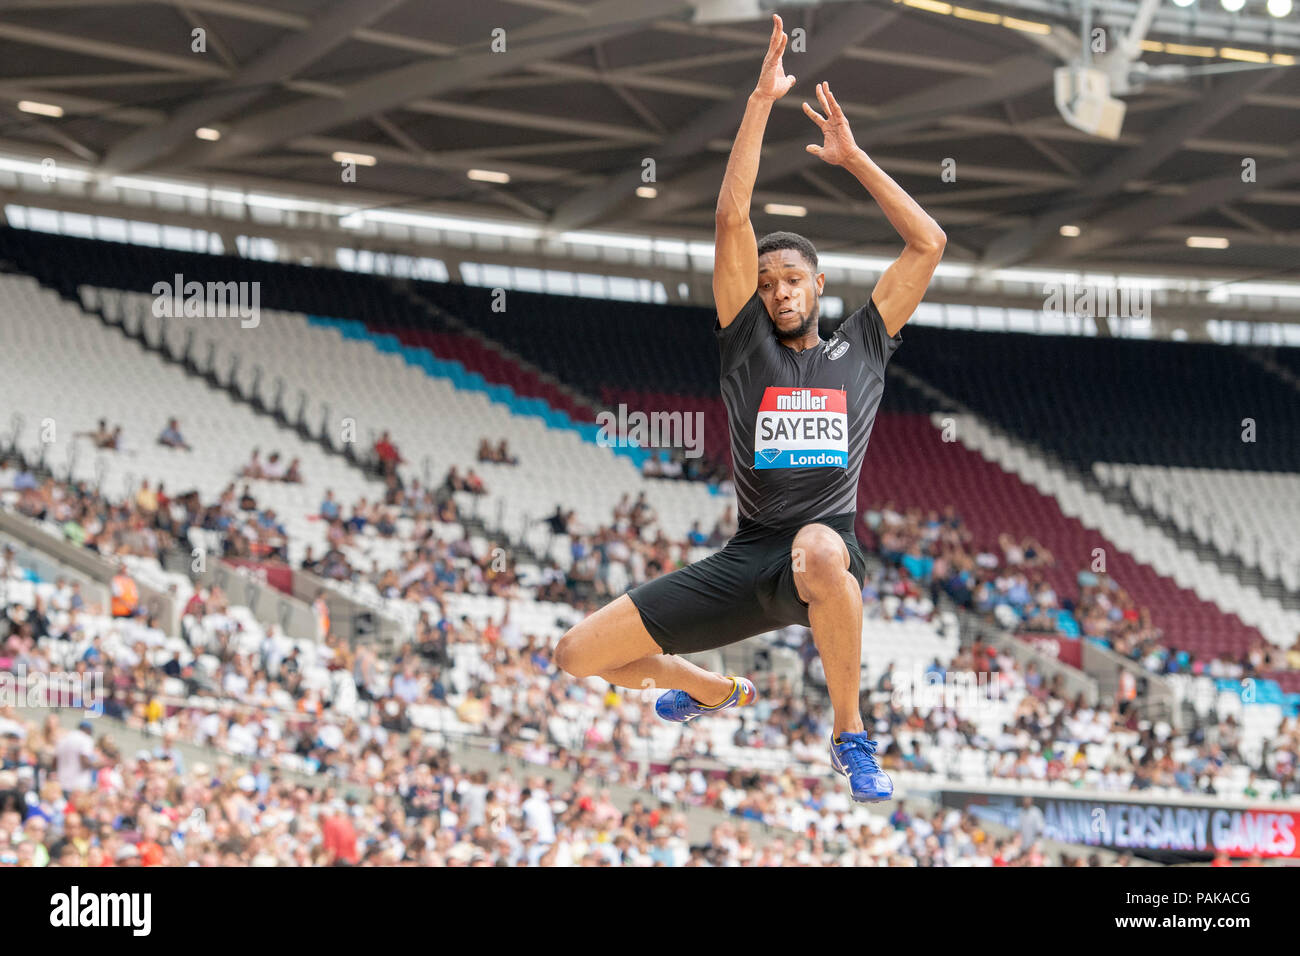 London, UK. 22nd July 2018. Feron Sayers (GBR) competes in the long jump at the Muller Anniversary Games at the London Stadium, London, Great Britiain, on 22 July 2018. Credit: Andrew Peat/Alamy Live News Stock Photo